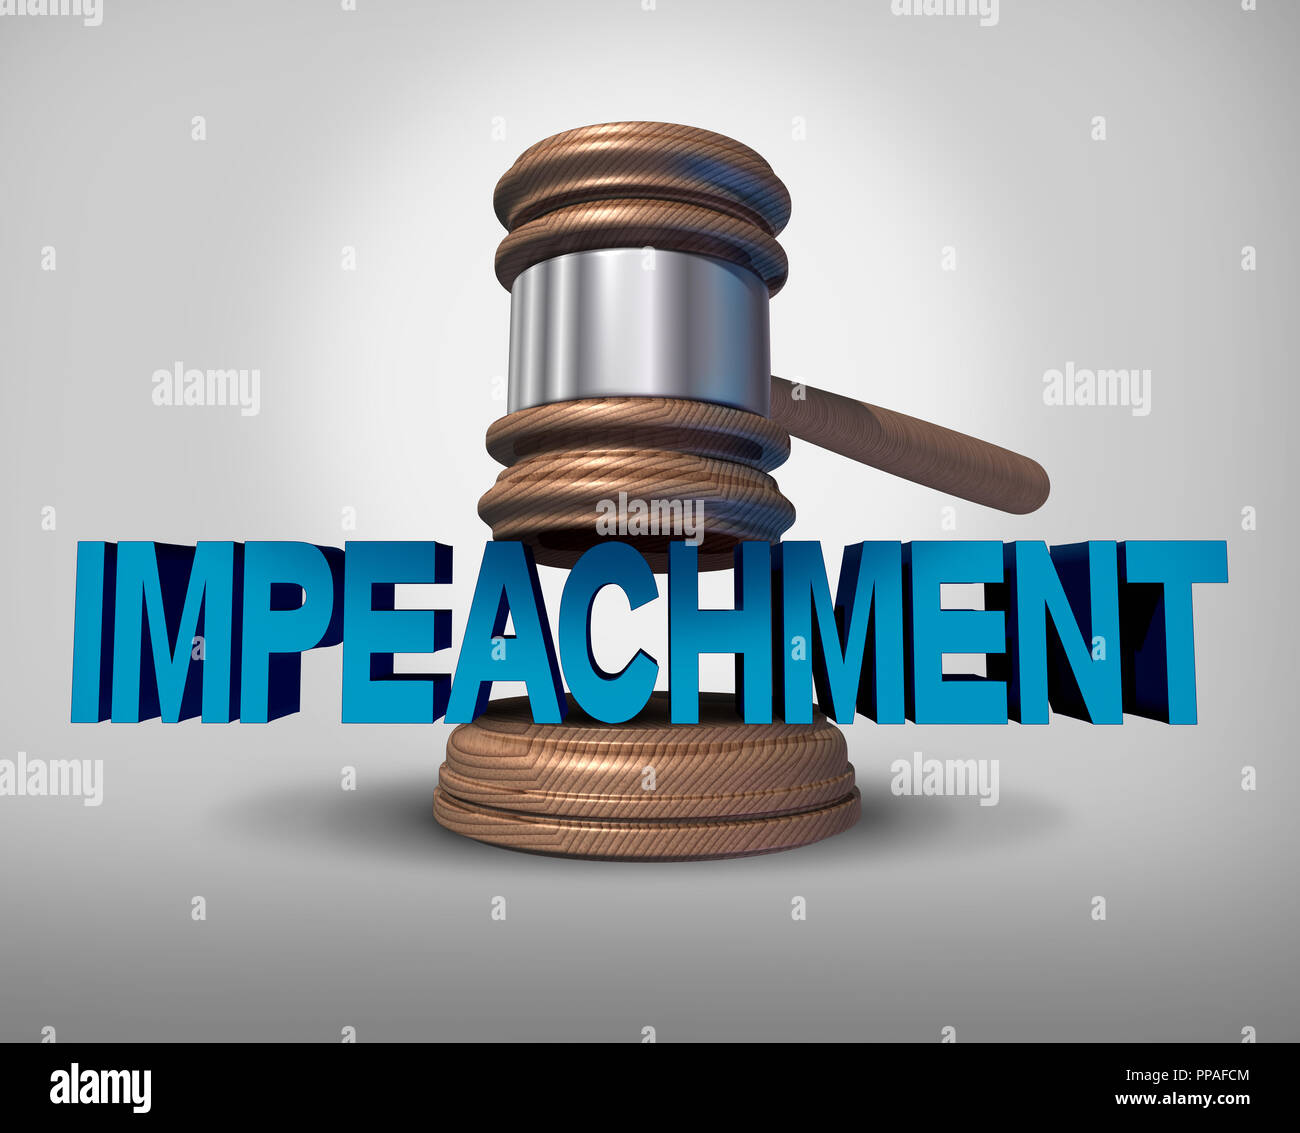 Impeachment law concept as a legal impeach metaphor for political injustice in society as a judge gavel coming down on an impeachable offence. Stock Photo